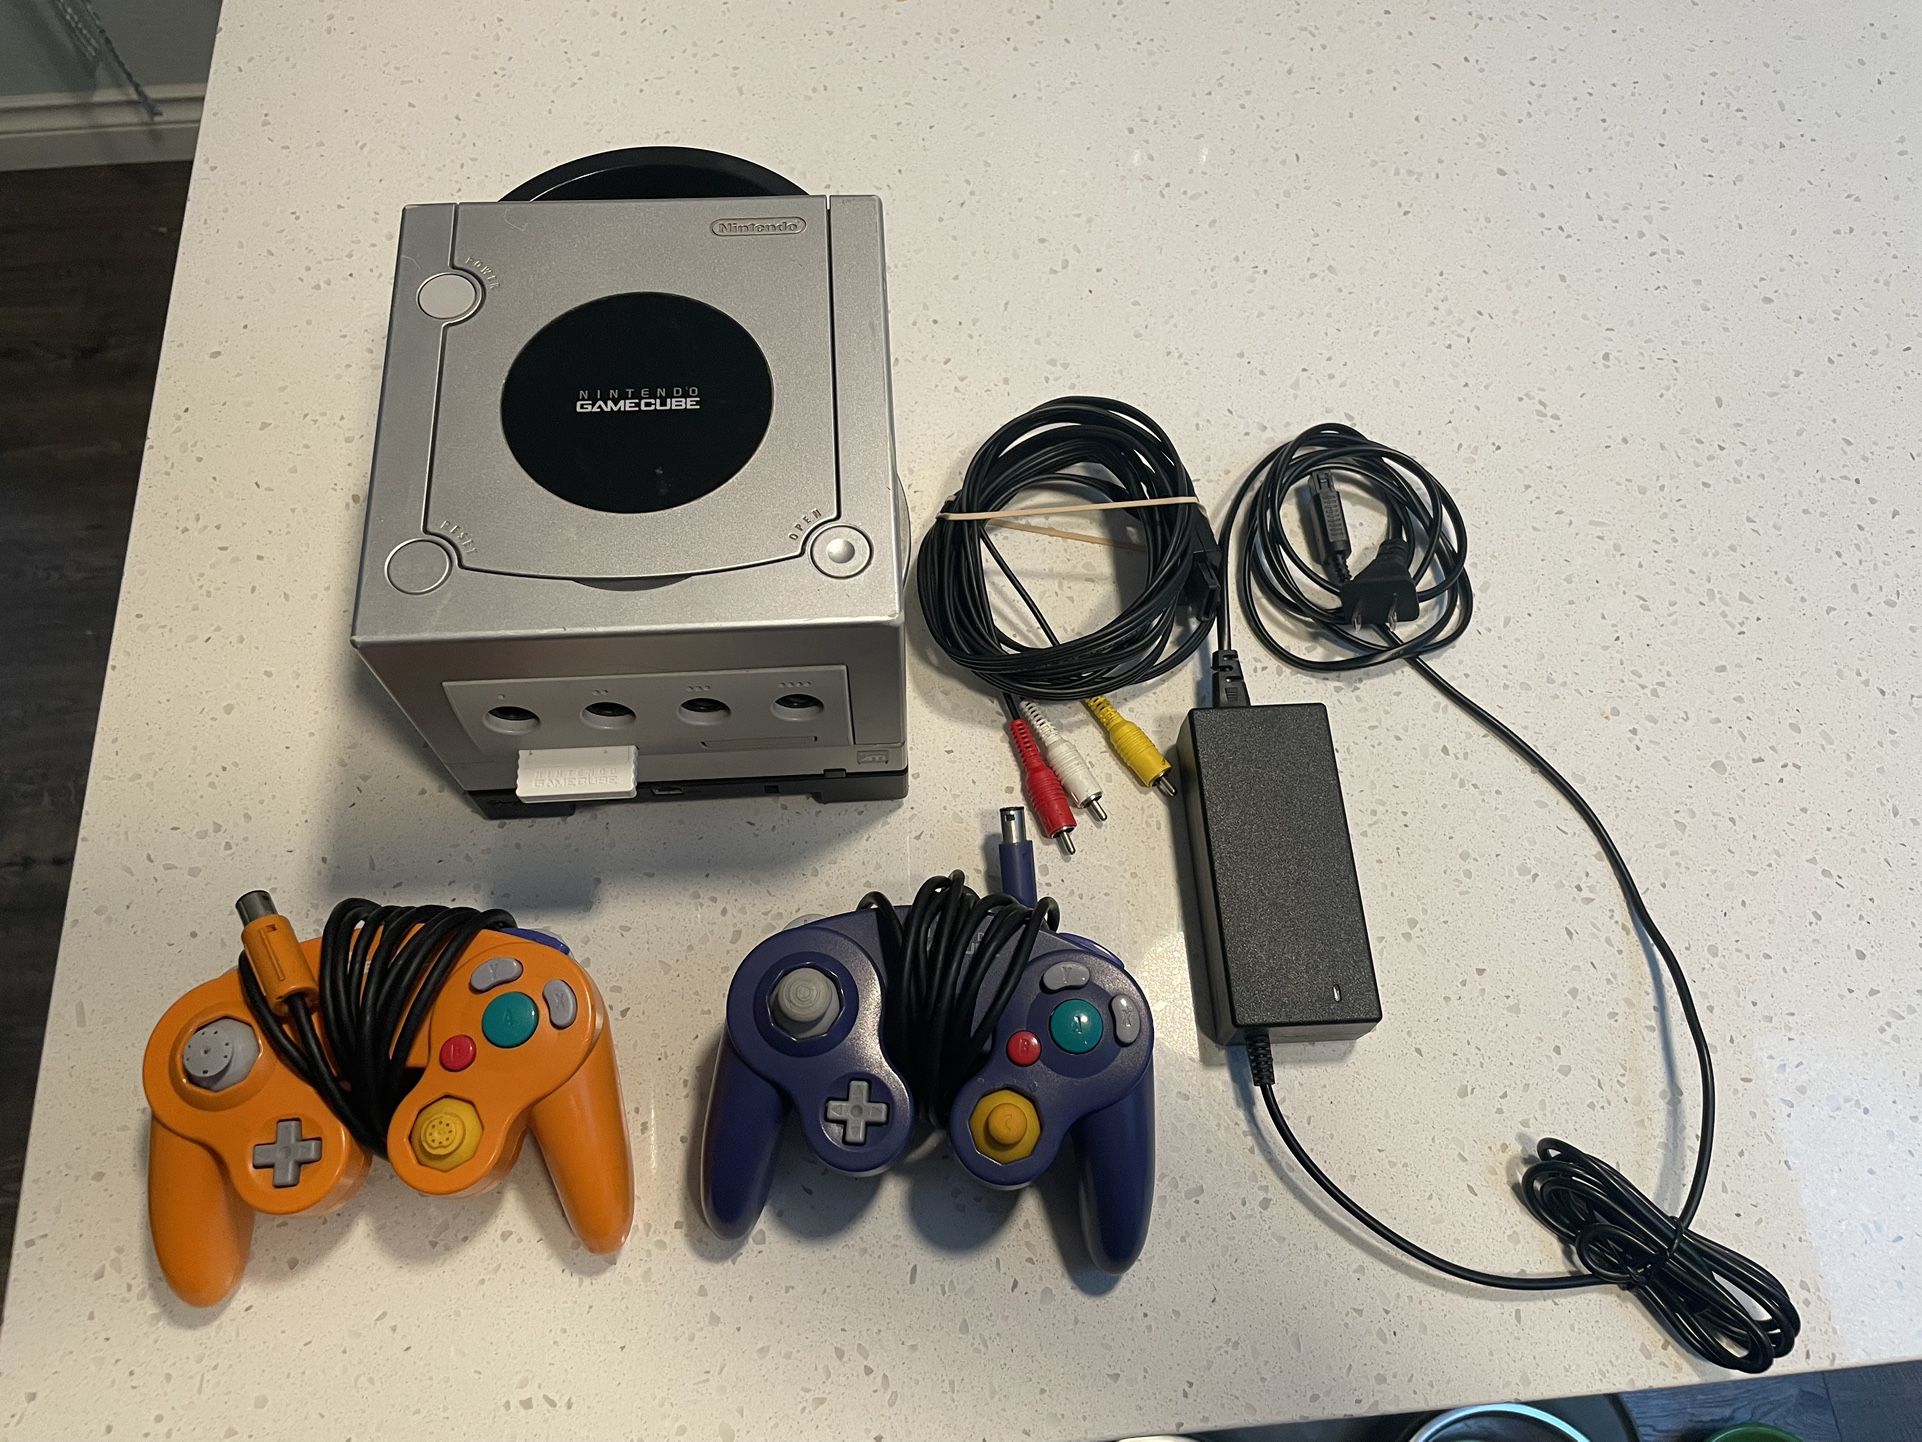 Nintendo Game Cube With Gameboy Player